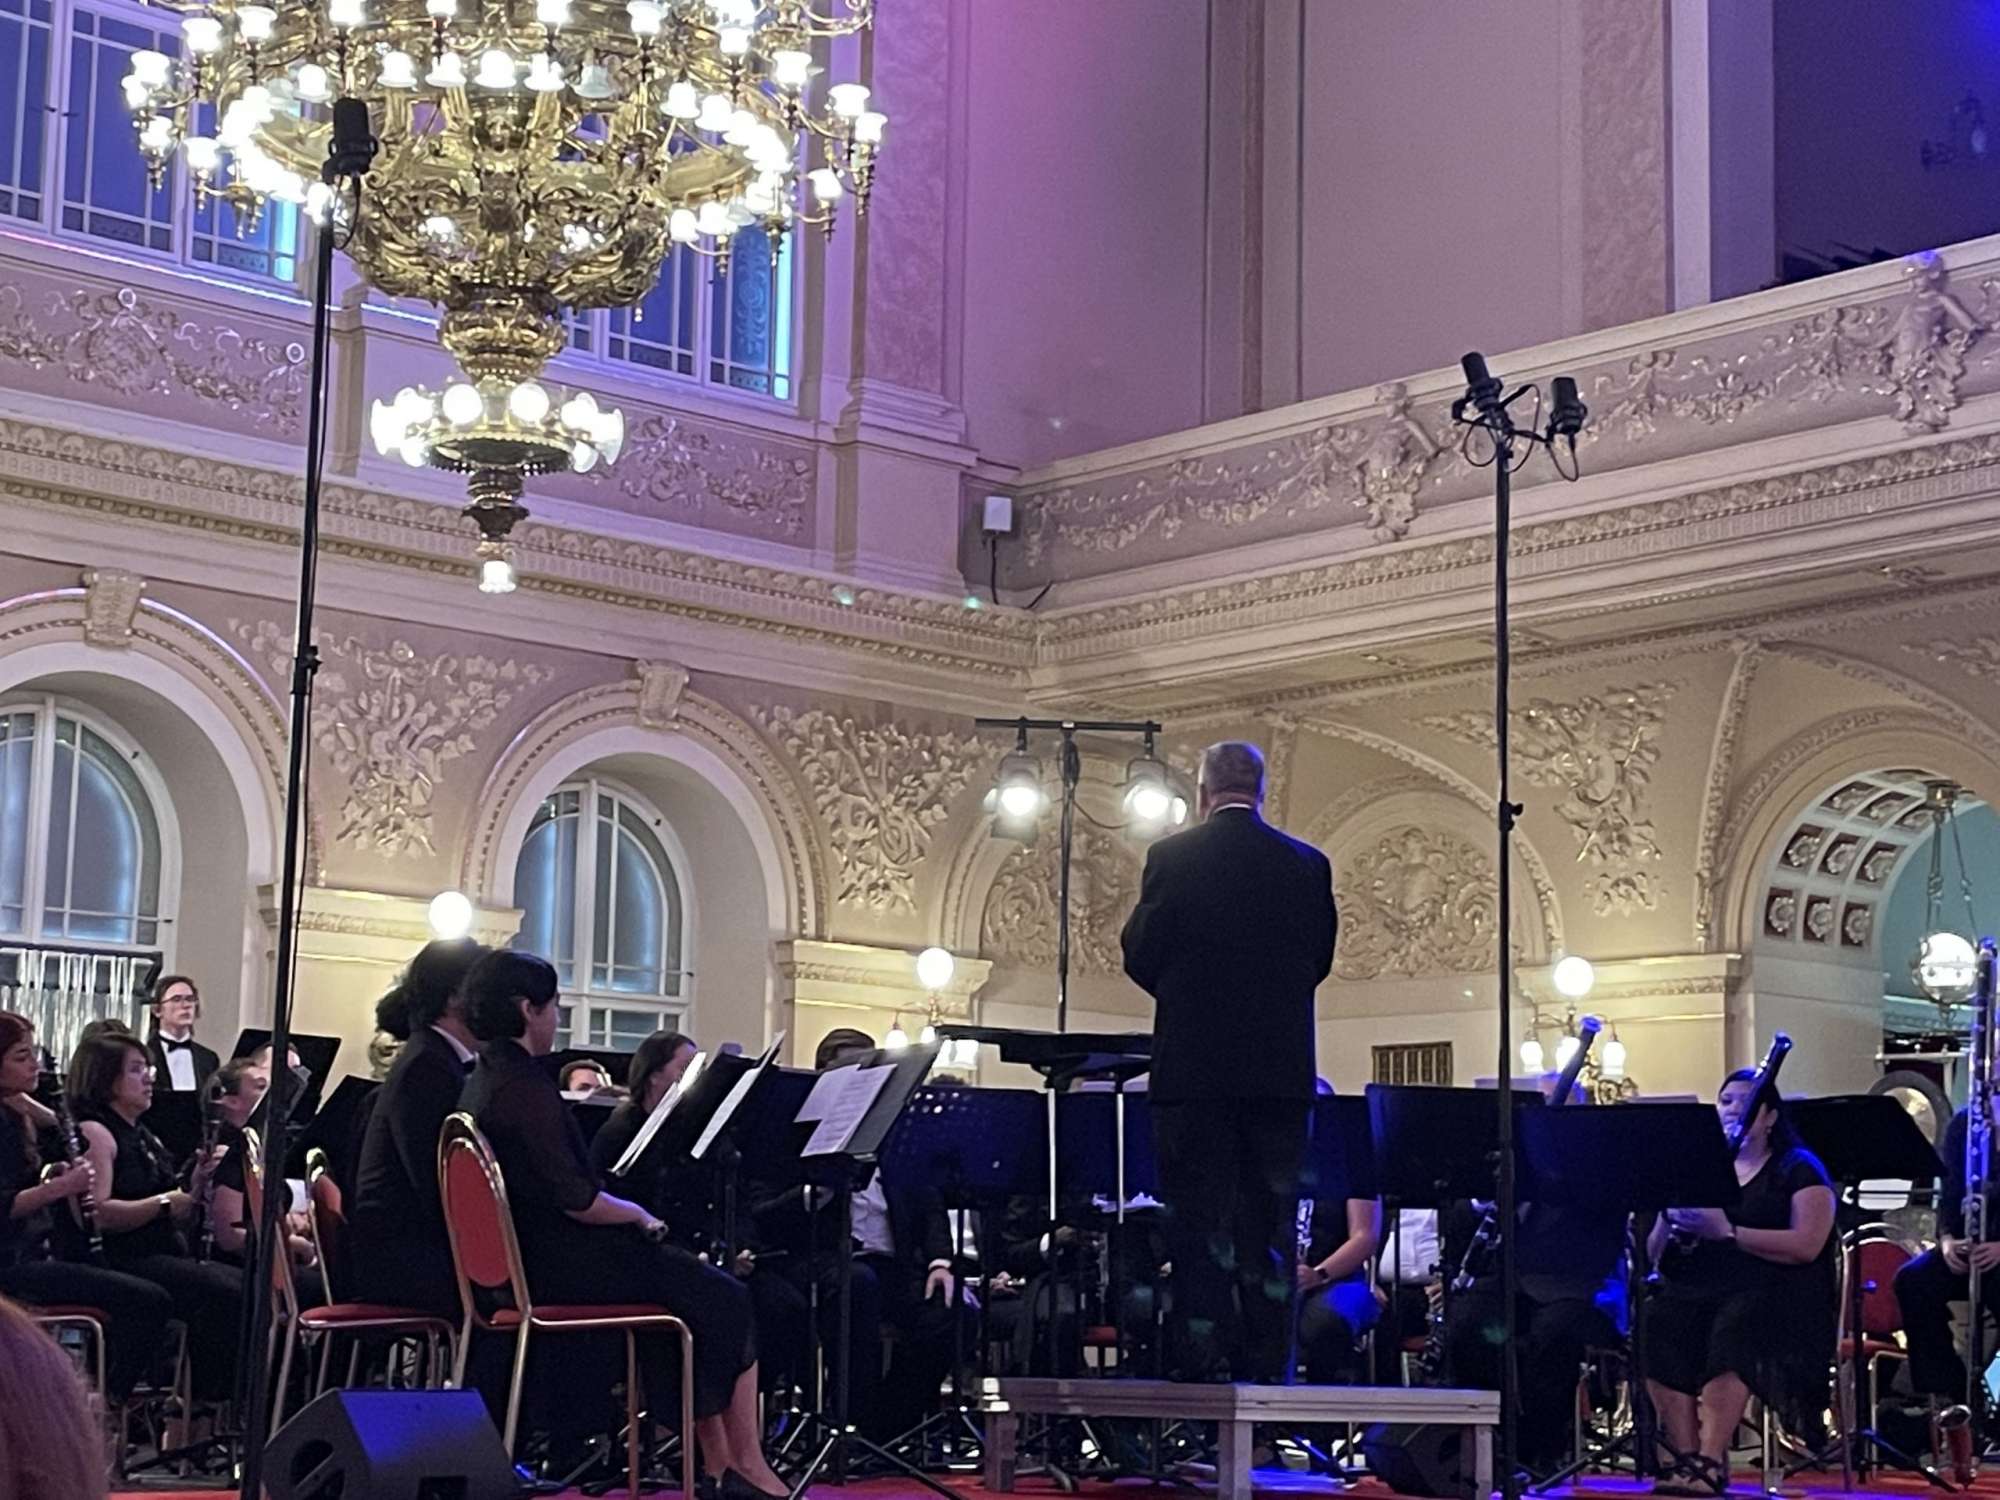 Thomas McCauley conducting the Wind Symphony in the Žofín Palace